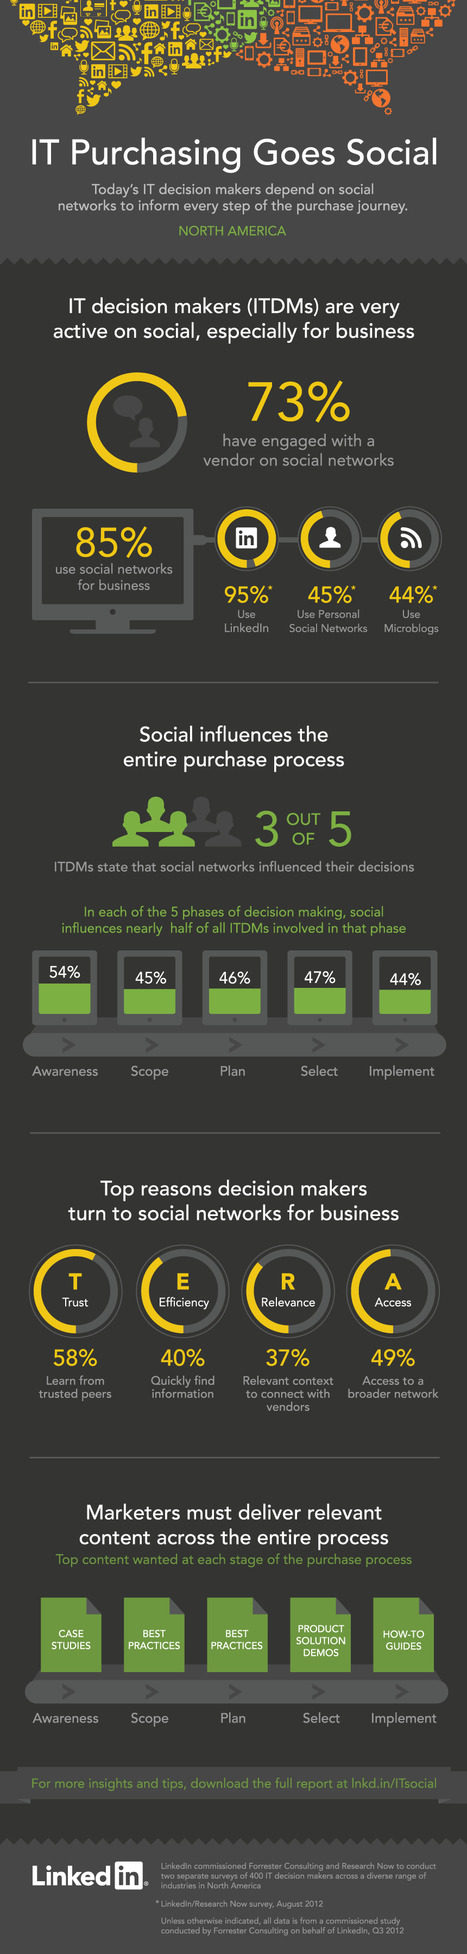 Infographic: How Social Media Impacts Purchasing Decisions... | MarketingHits | Scoop.it